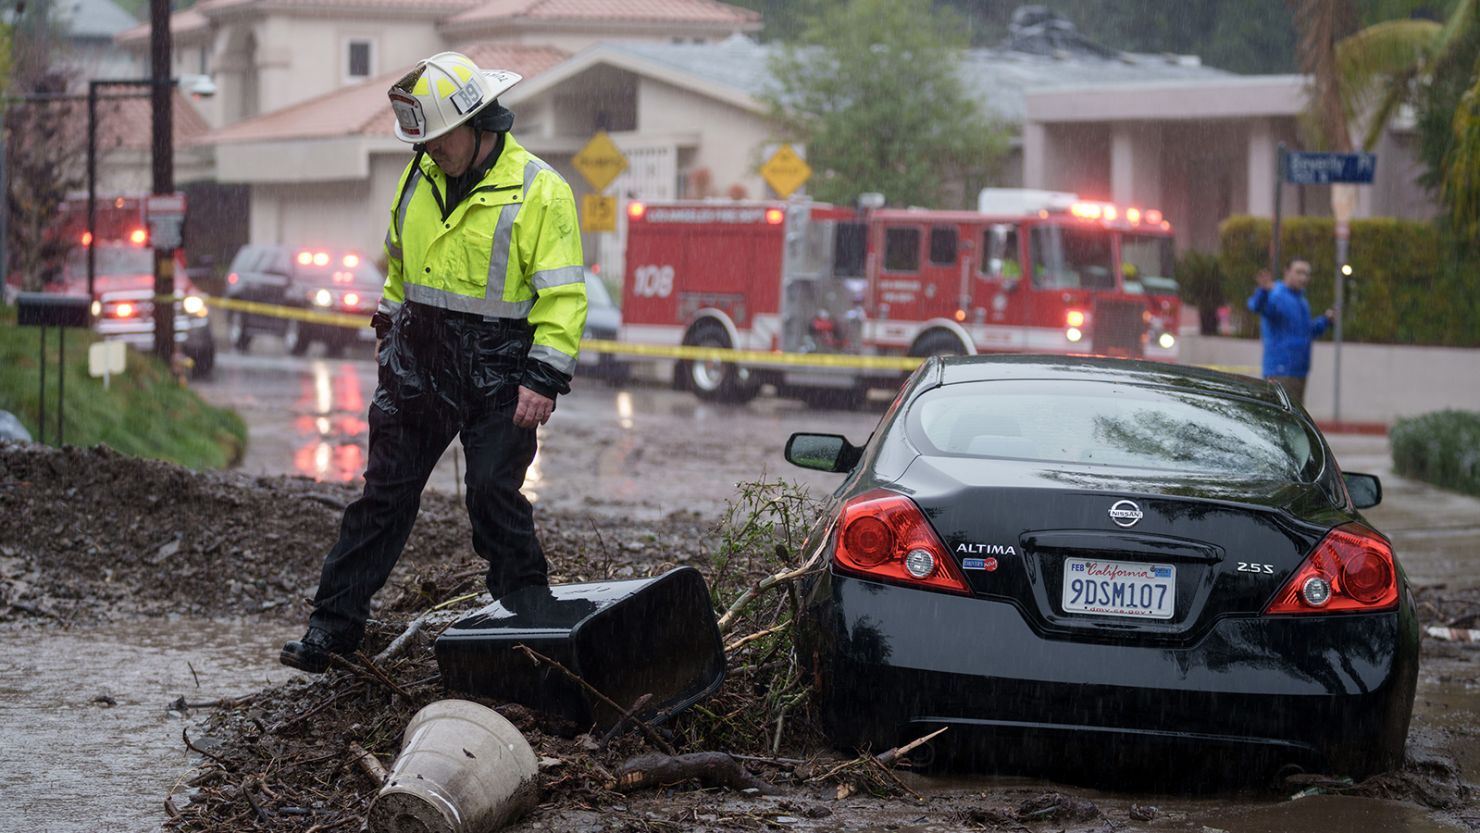 A firefighter walks Monday near a vehicle stranded in mud and rock during a storm in Los Angeles.